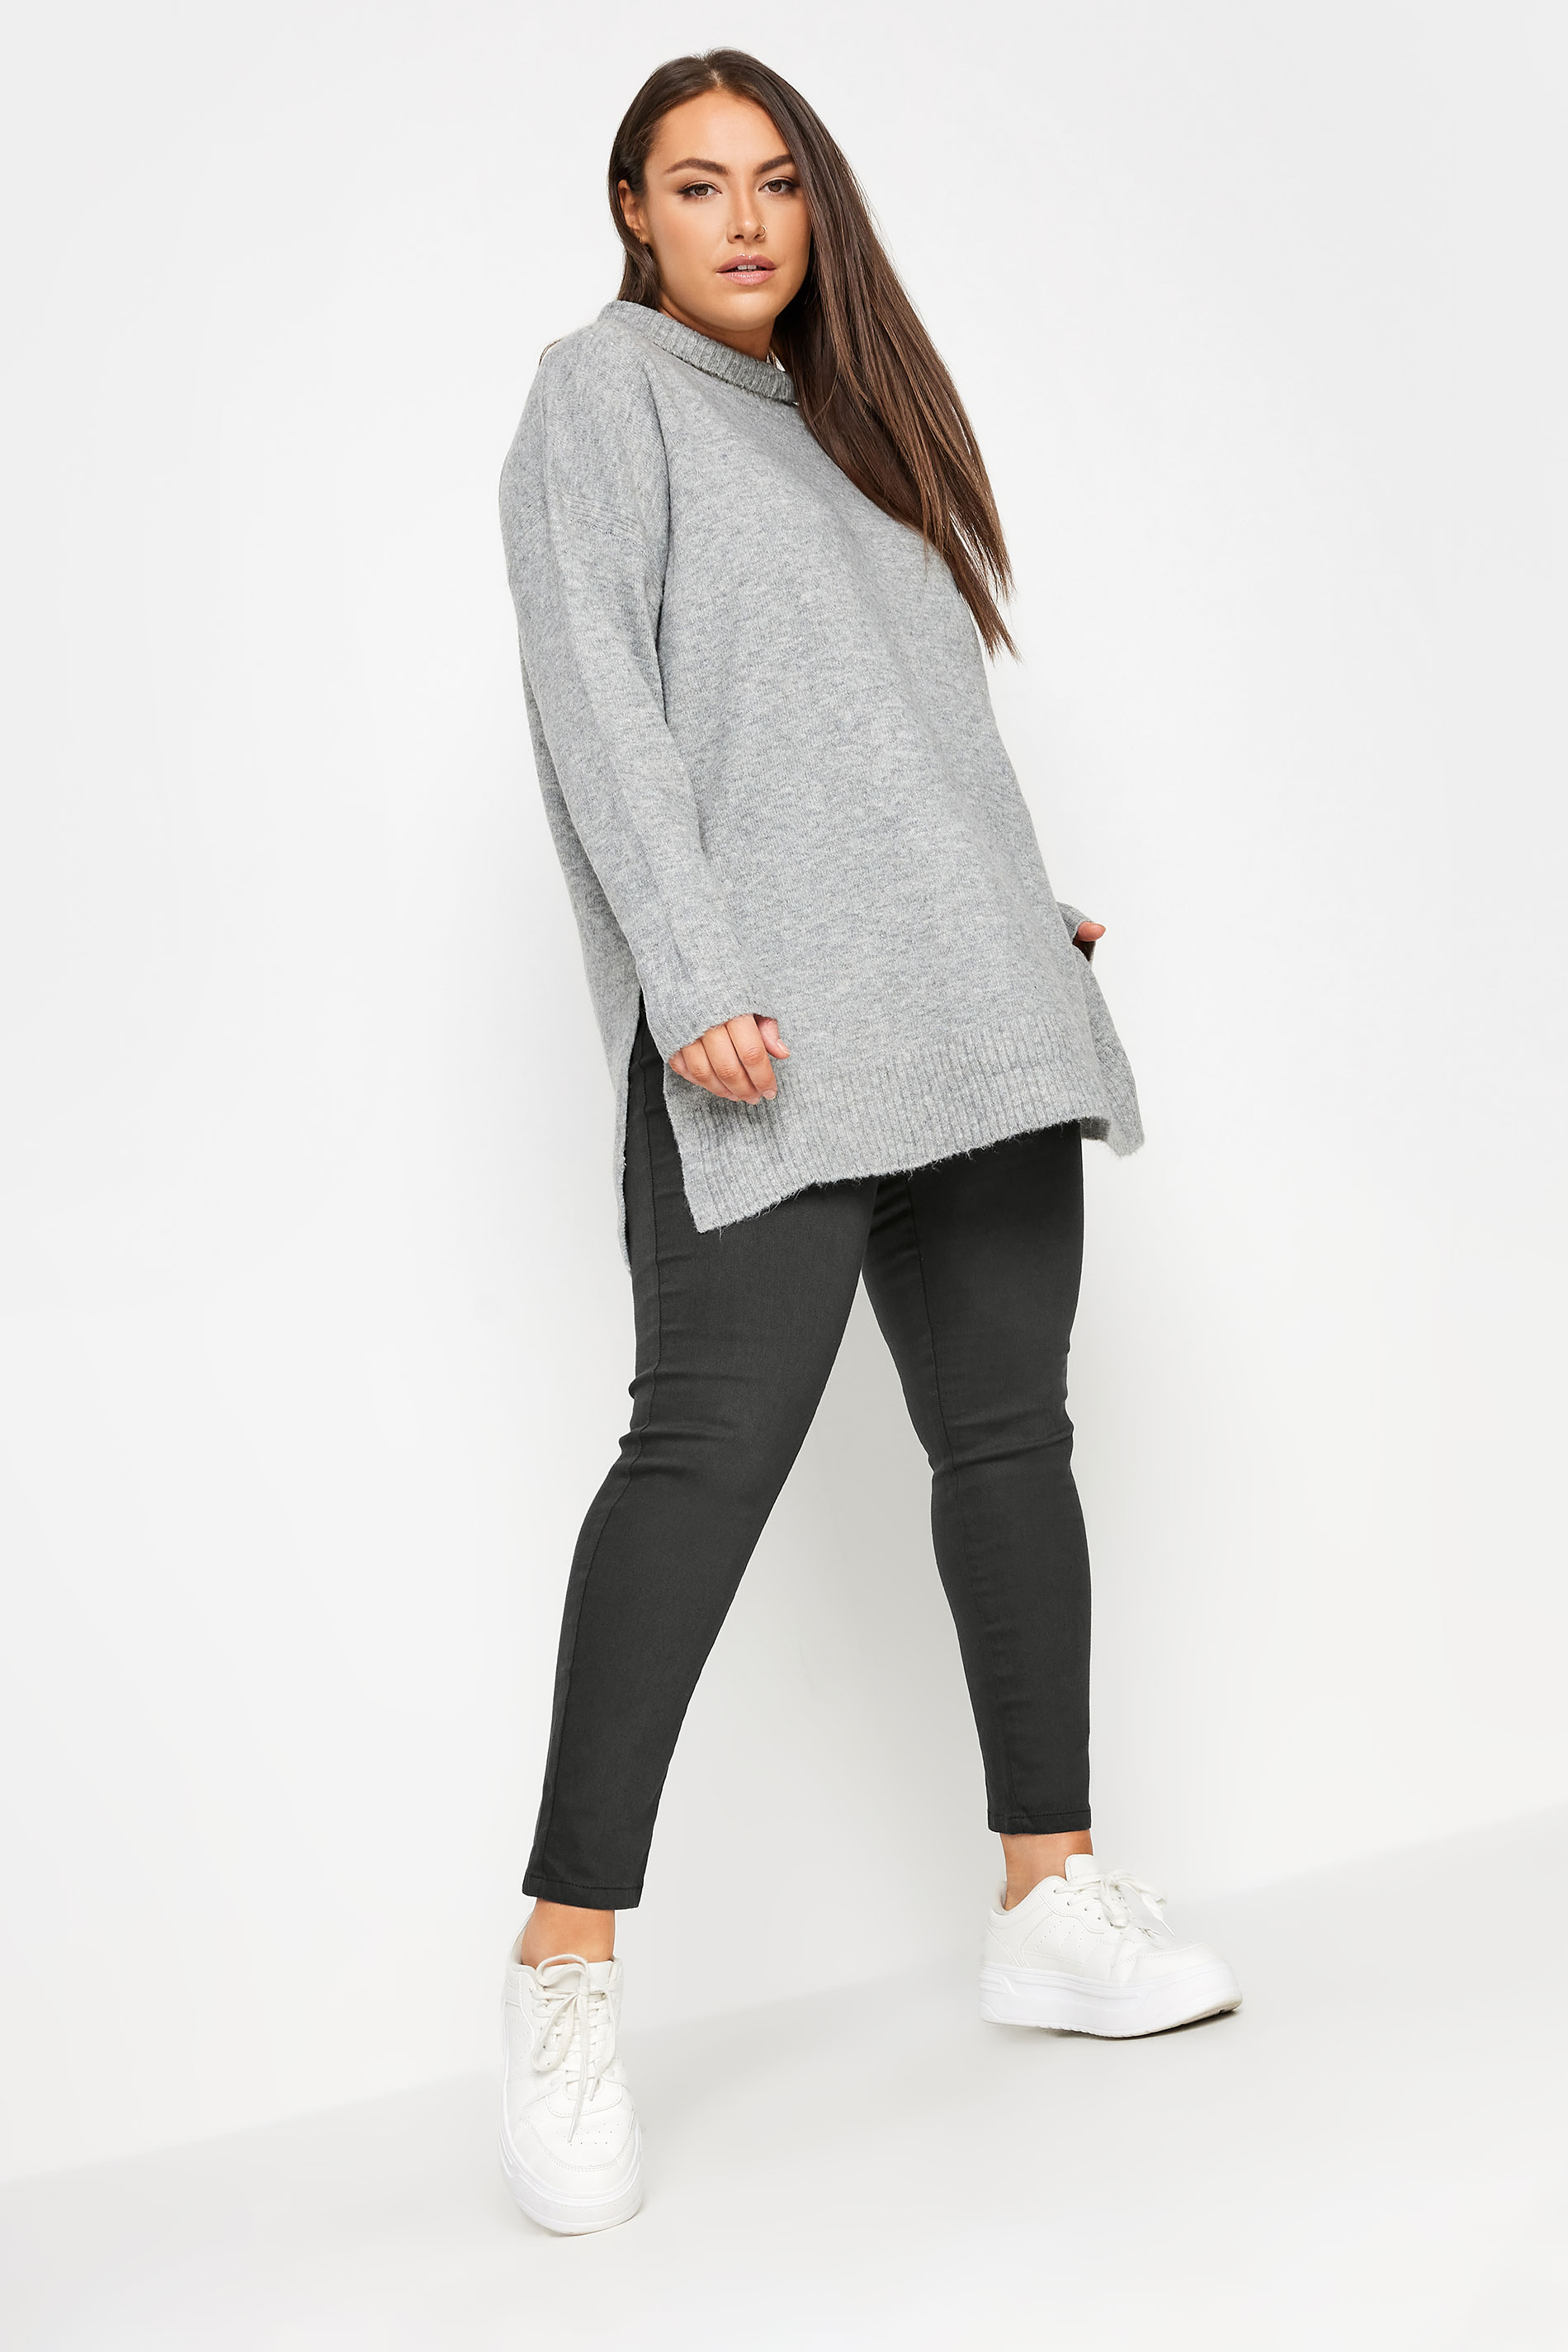 YOURS Plus Size Grey Stretch Pull On GRACE Jeggings | Yours Clothing 2